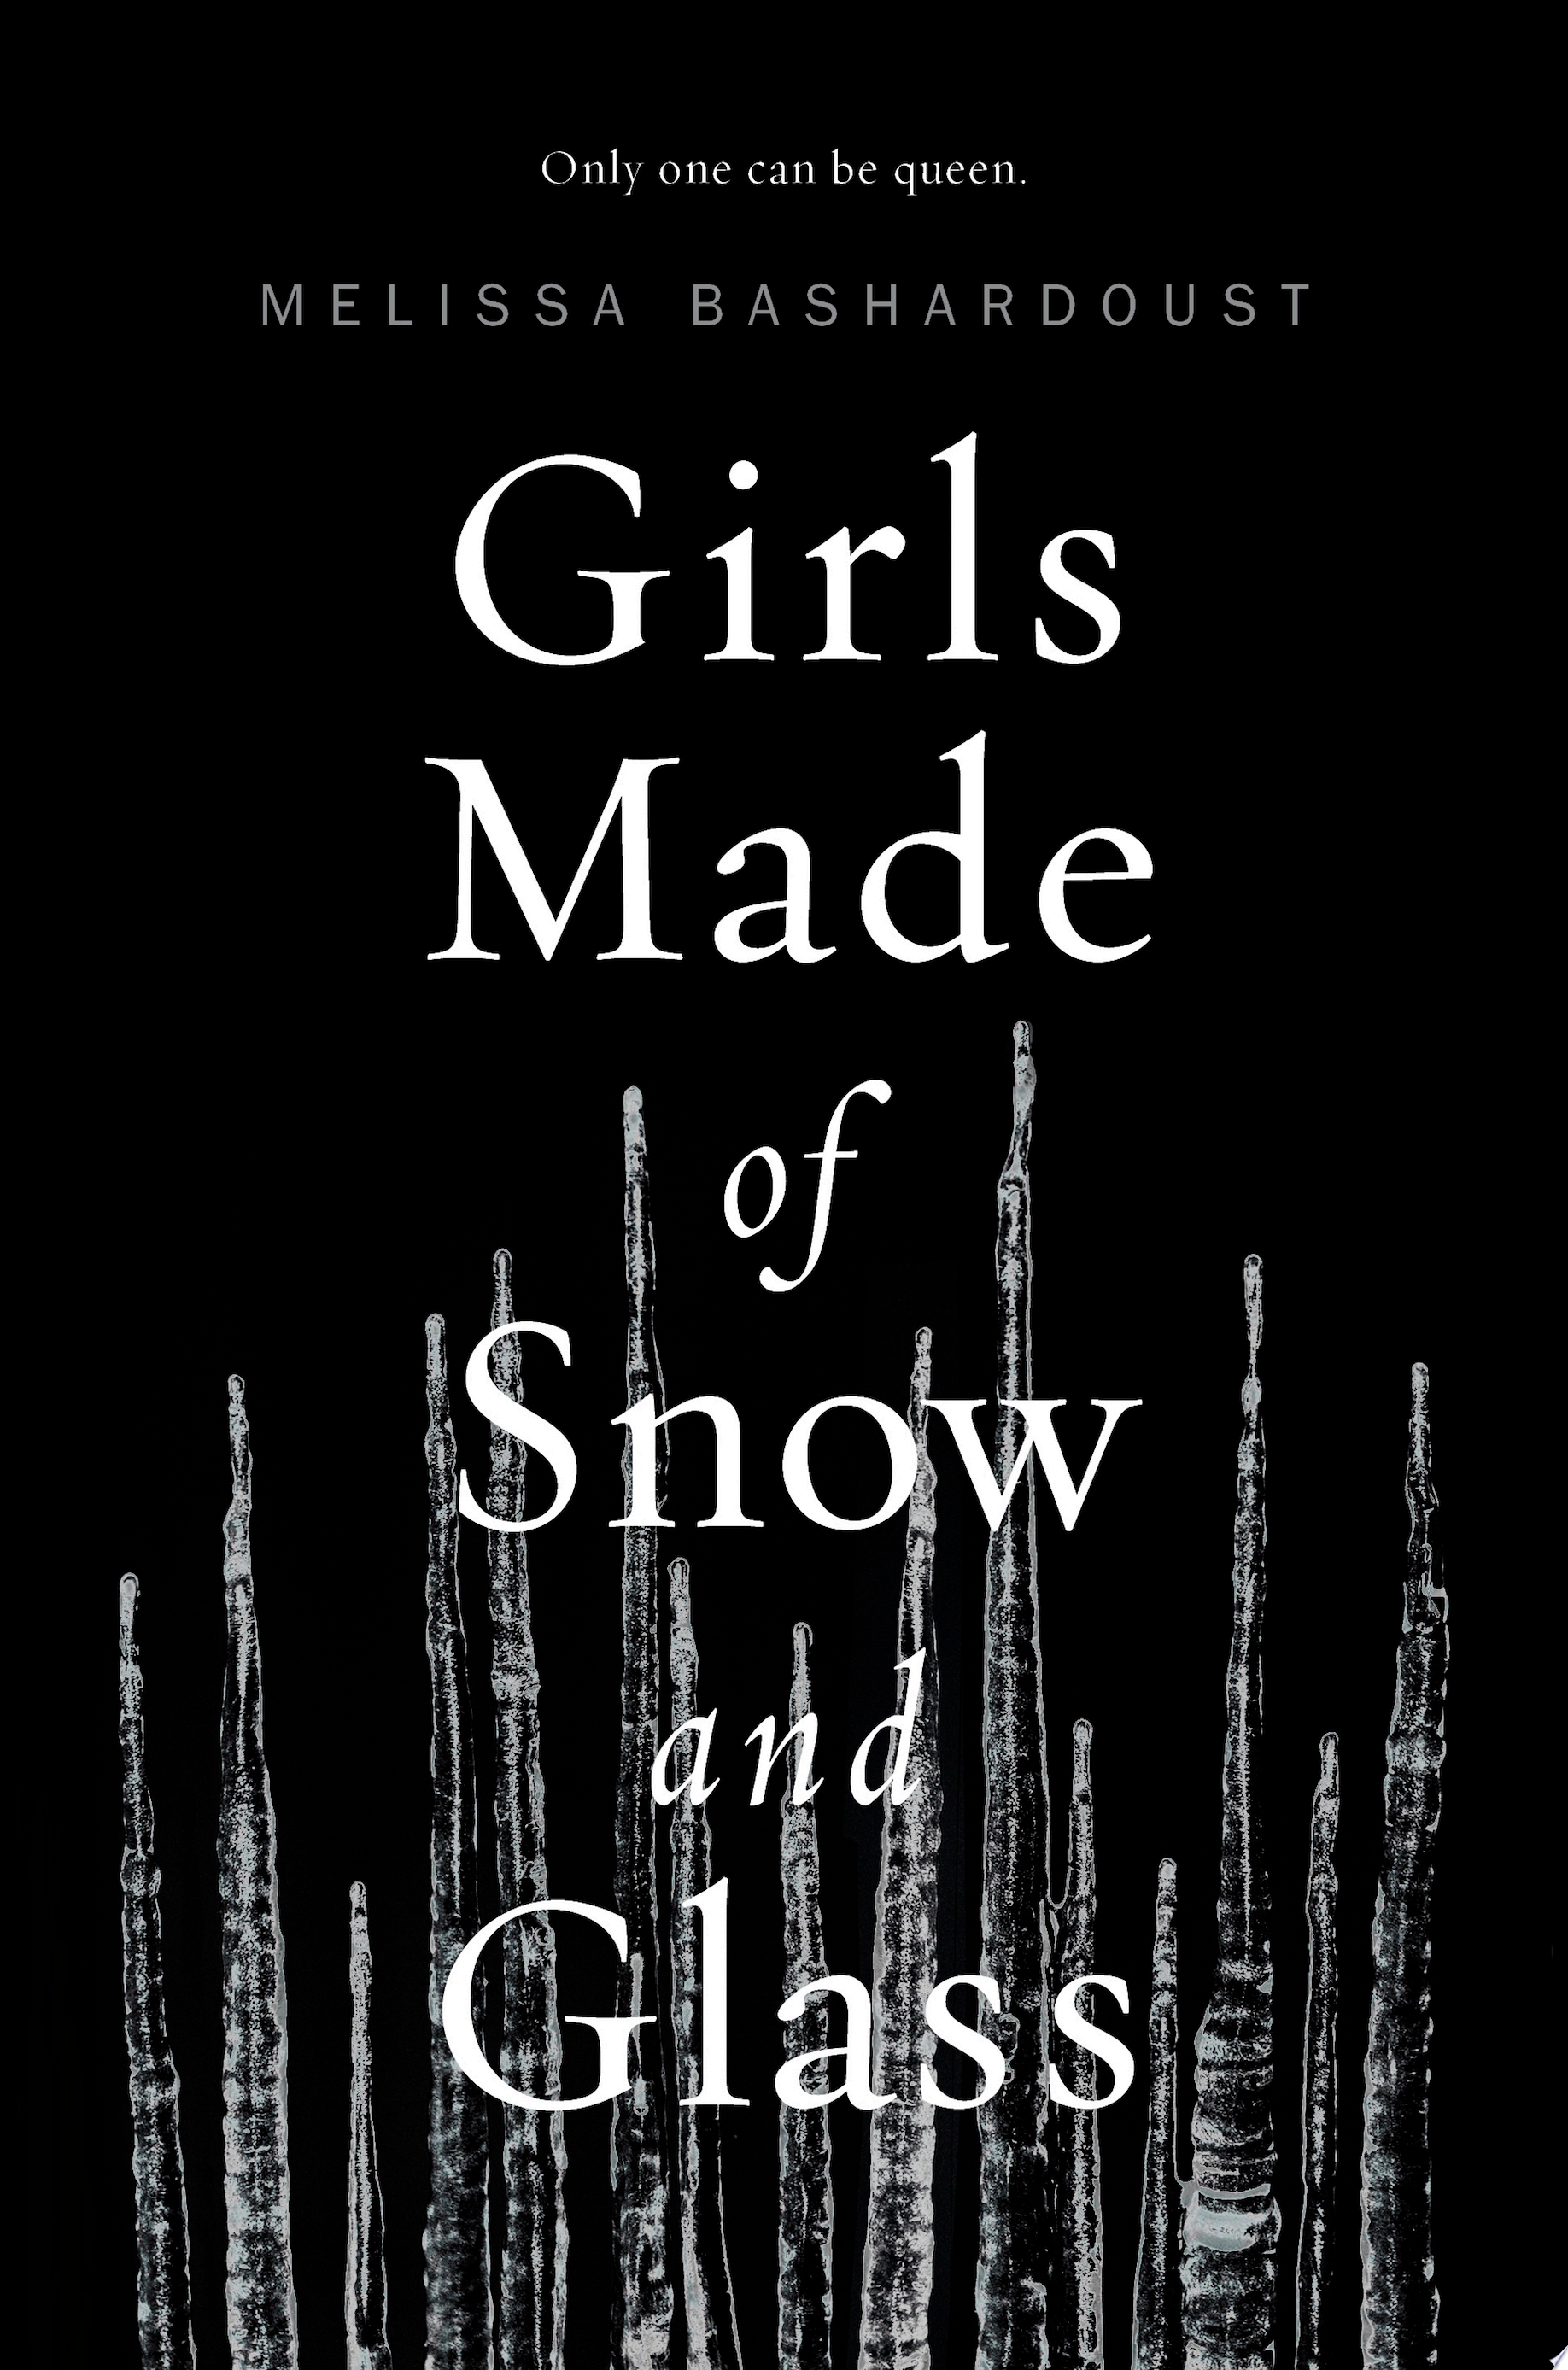 Image for "Girls Made of Snow and Glass"